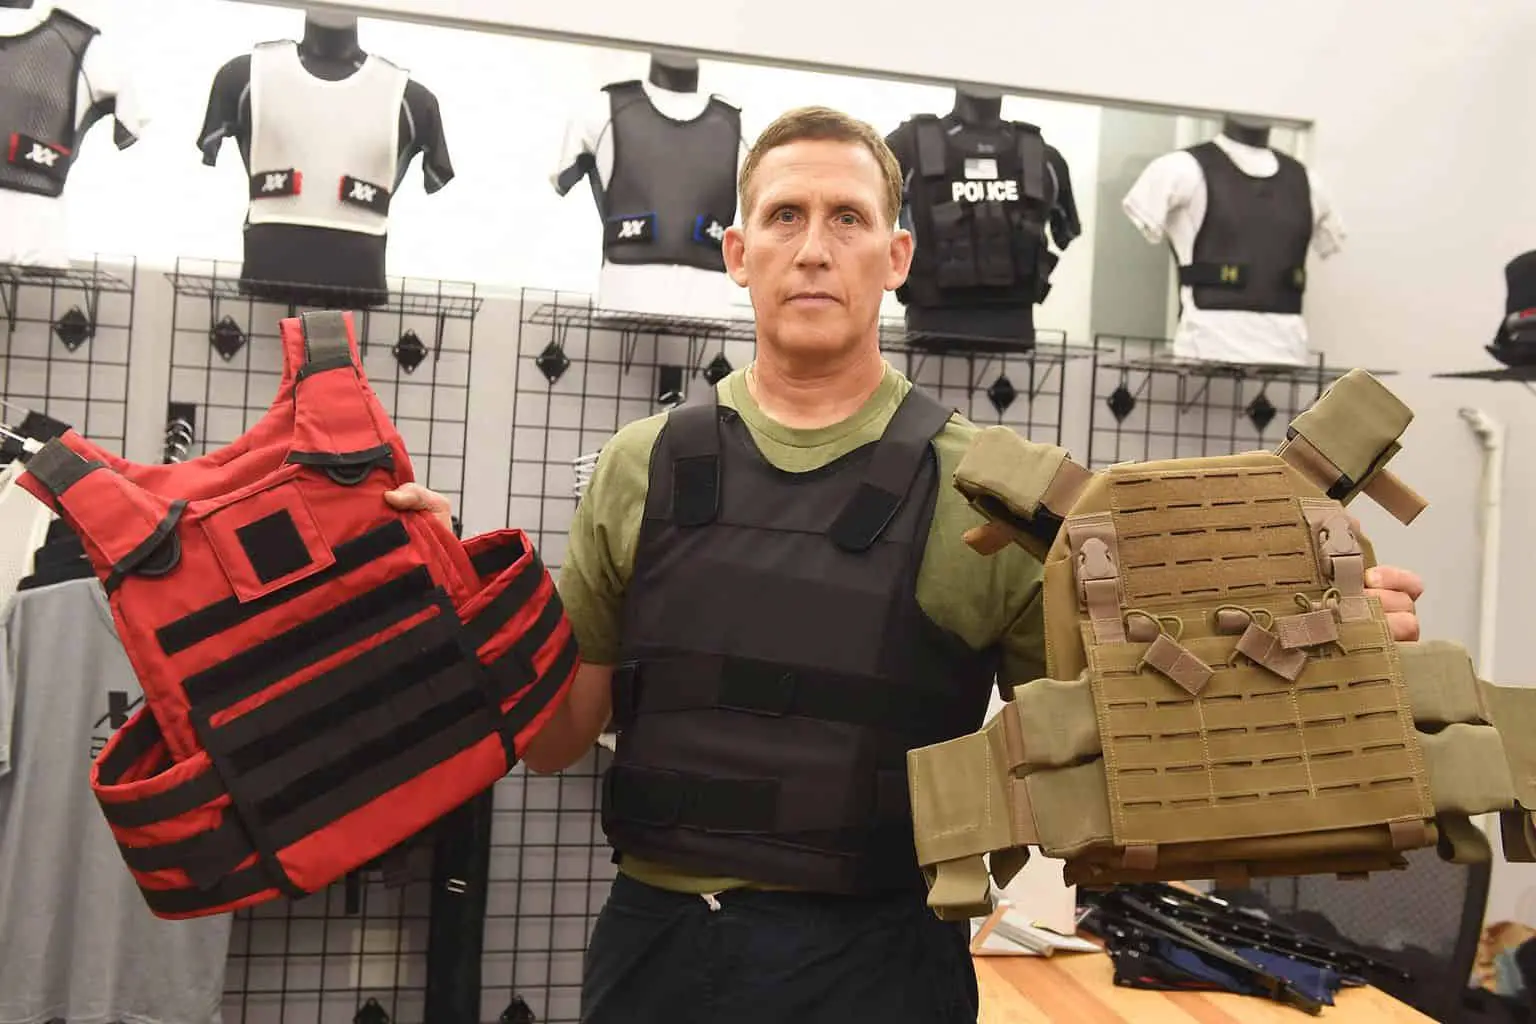 Bulletproof vests are crucial for personal protection